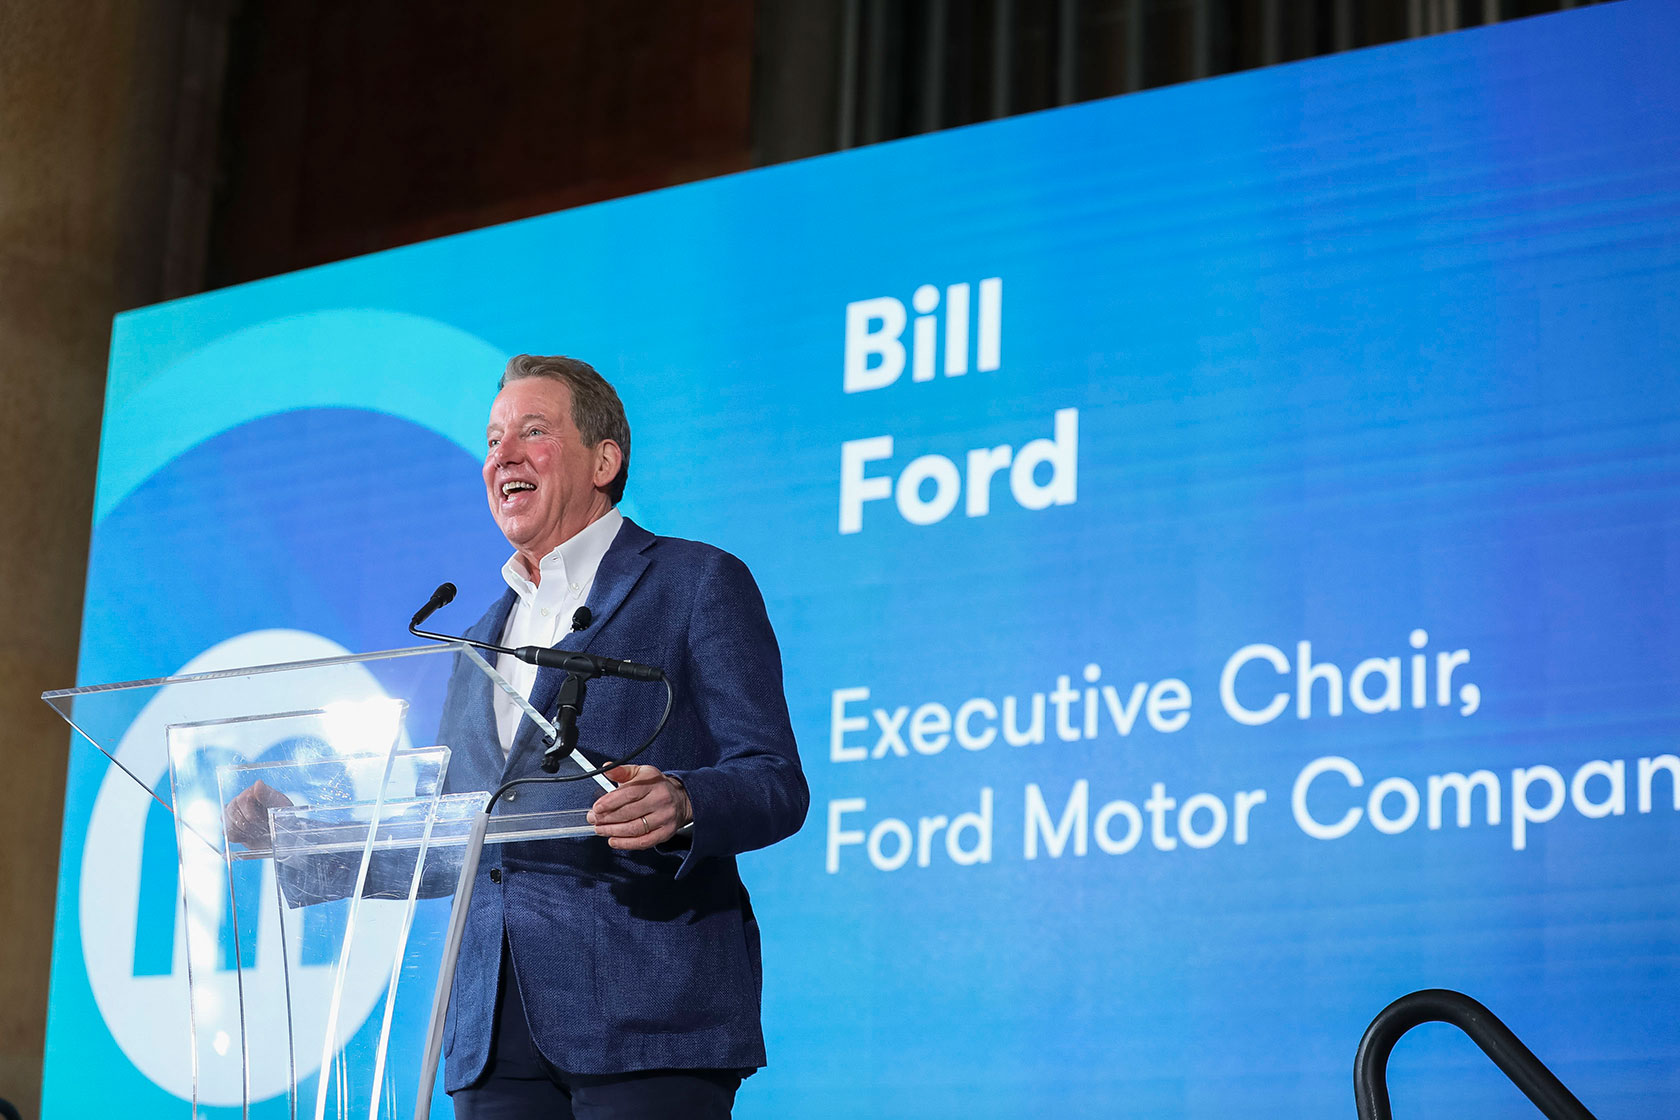 Bill Ford at the Michigan Central Founding Member and Partnership Announcement